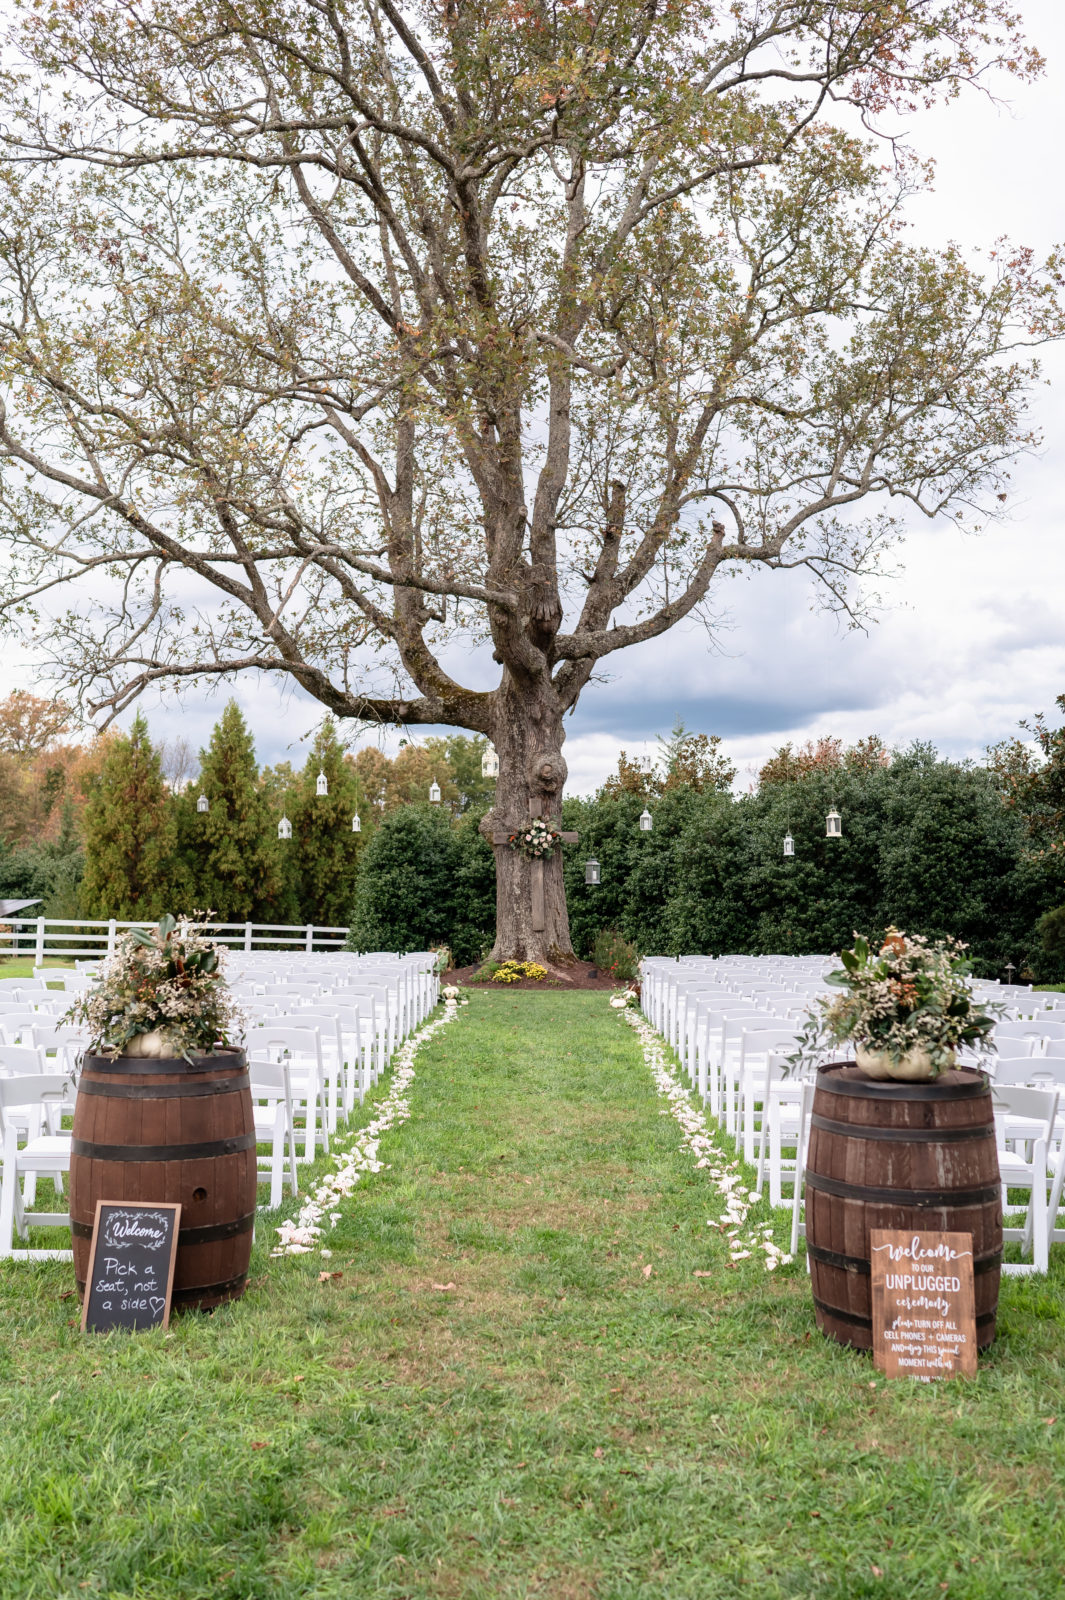 Ceremony site for bride and groom